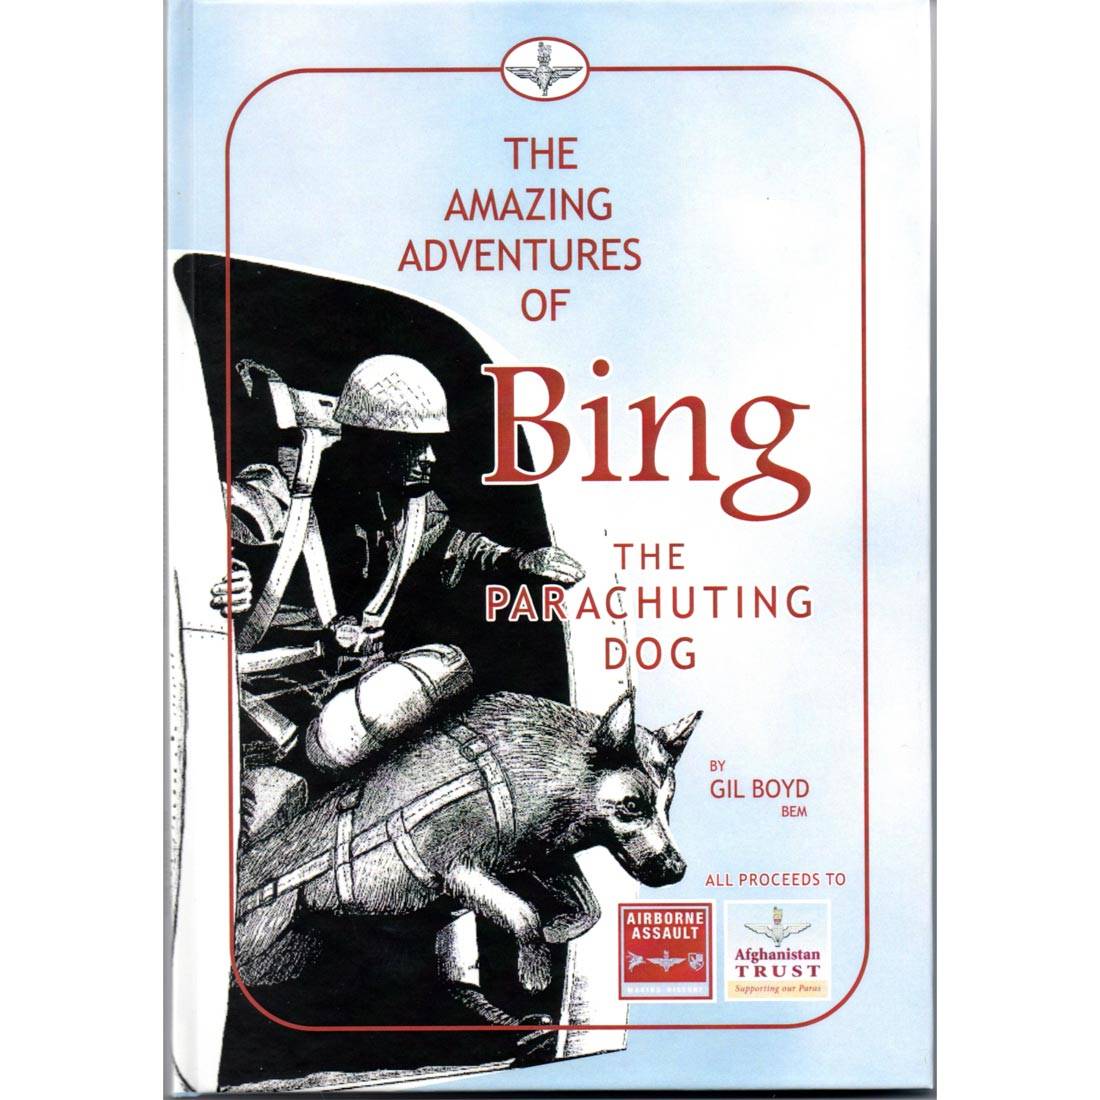 The Amazing Adventures Of Bing The Parachuting Dog by Gil Boyd (Book)